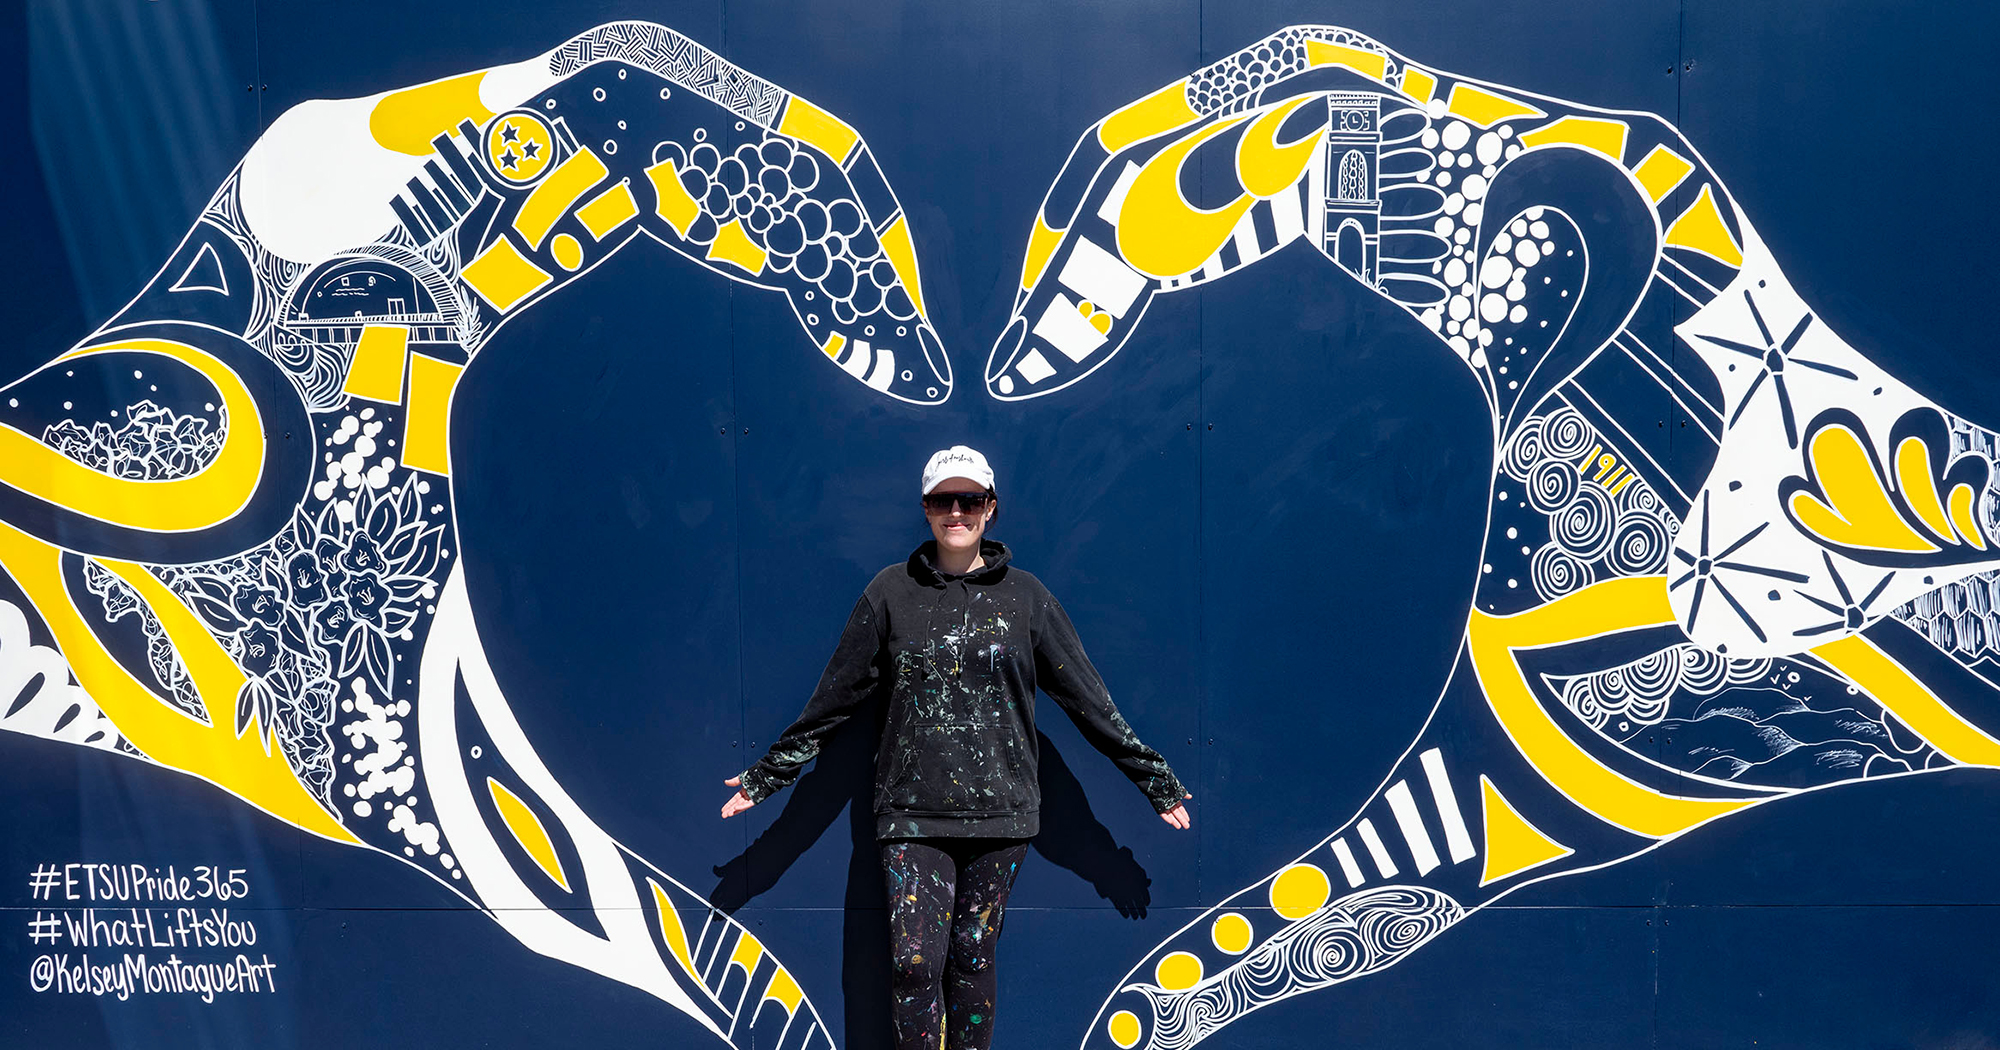 A mural of two hands joining together to create a heart. Inside the outlne of the hands are doodle-like drawings of regional symbols, such as rhododendrons and mountains as well as ETSU landmarks like the carillon. 